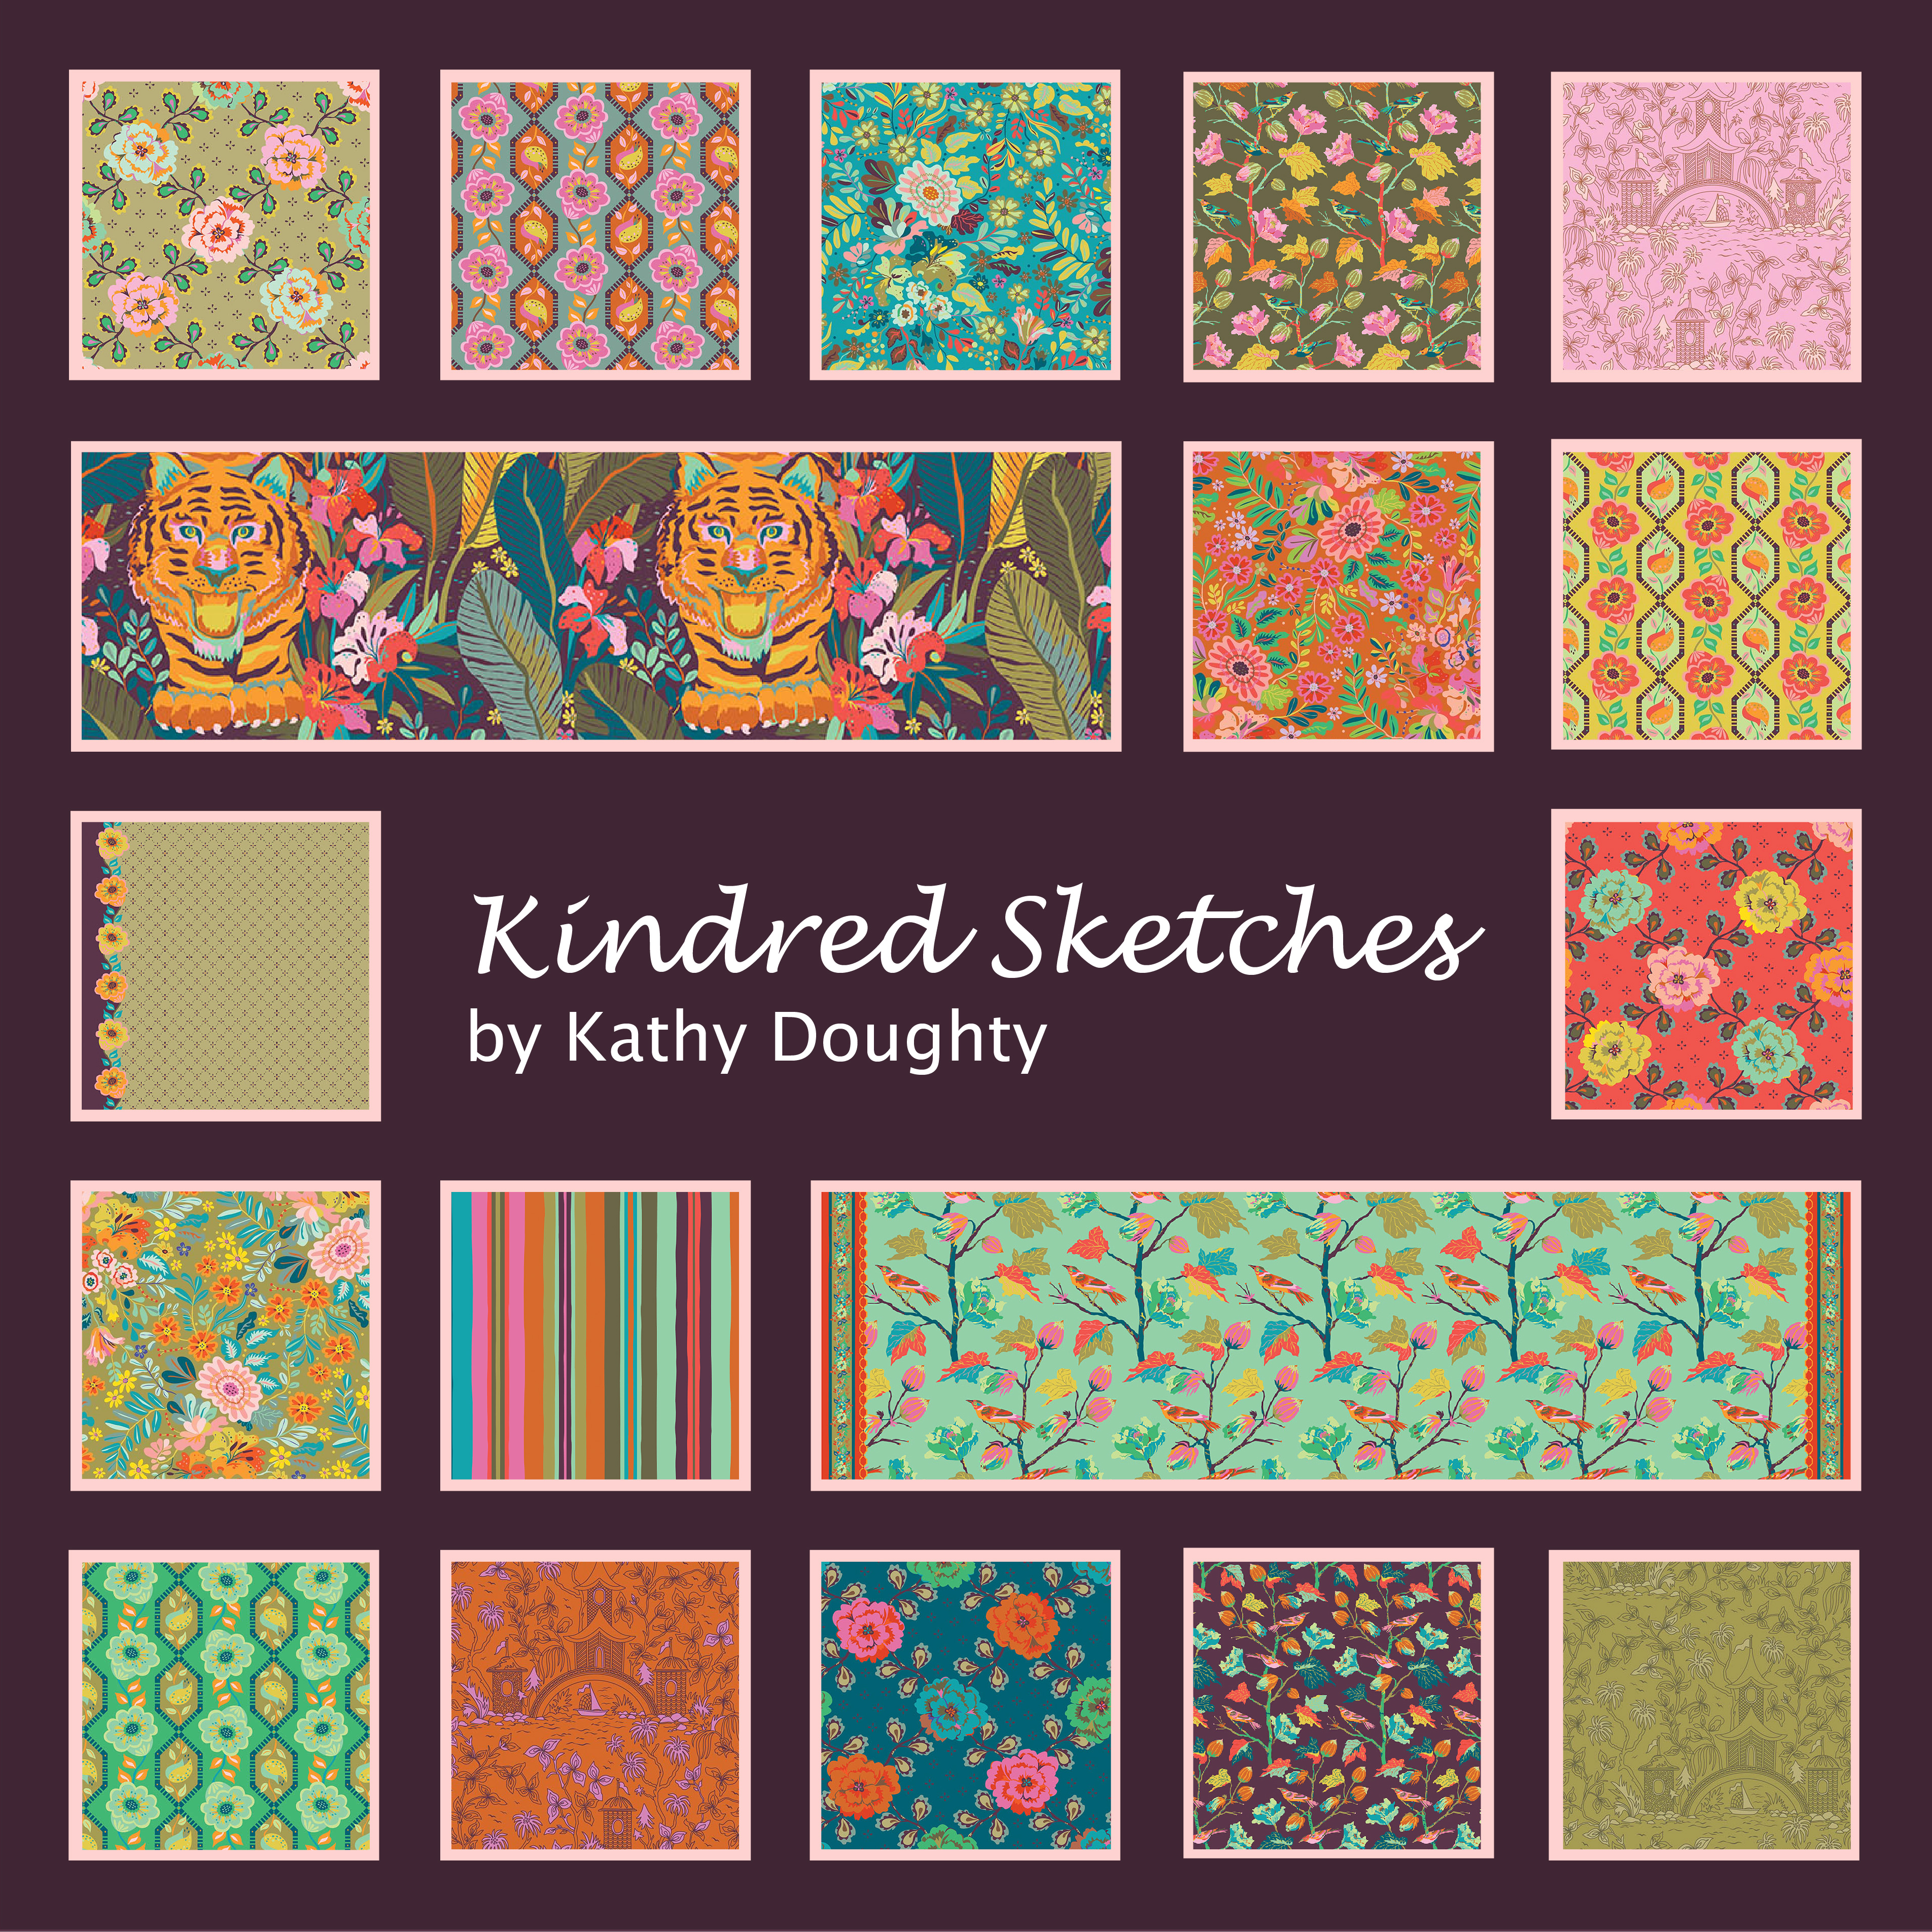 This image shows eighteen fabric swatches in the collection “Kindred Sketches” by Kathy Doughty. Prints in this line are colorful and inspired by nature, including flowers, vines, tigers, and stripes among others.